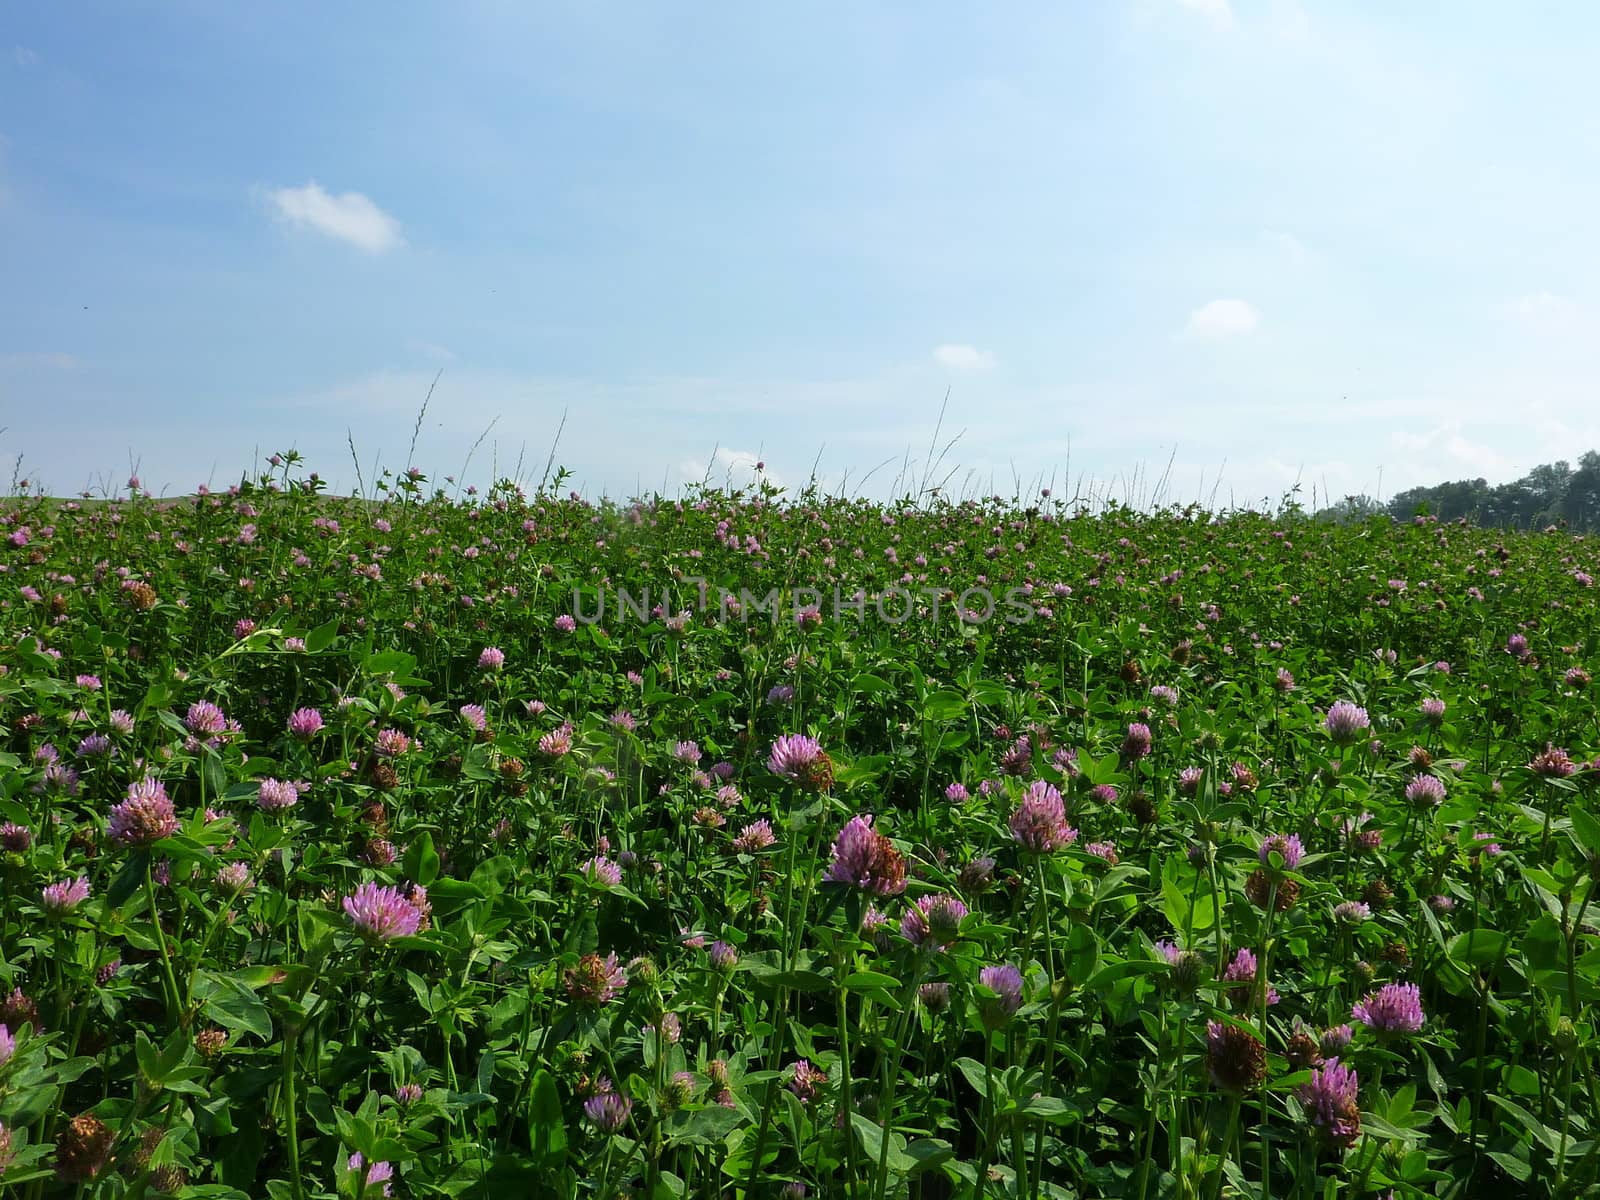 Clover field (Trifolium) with blue sky on background.